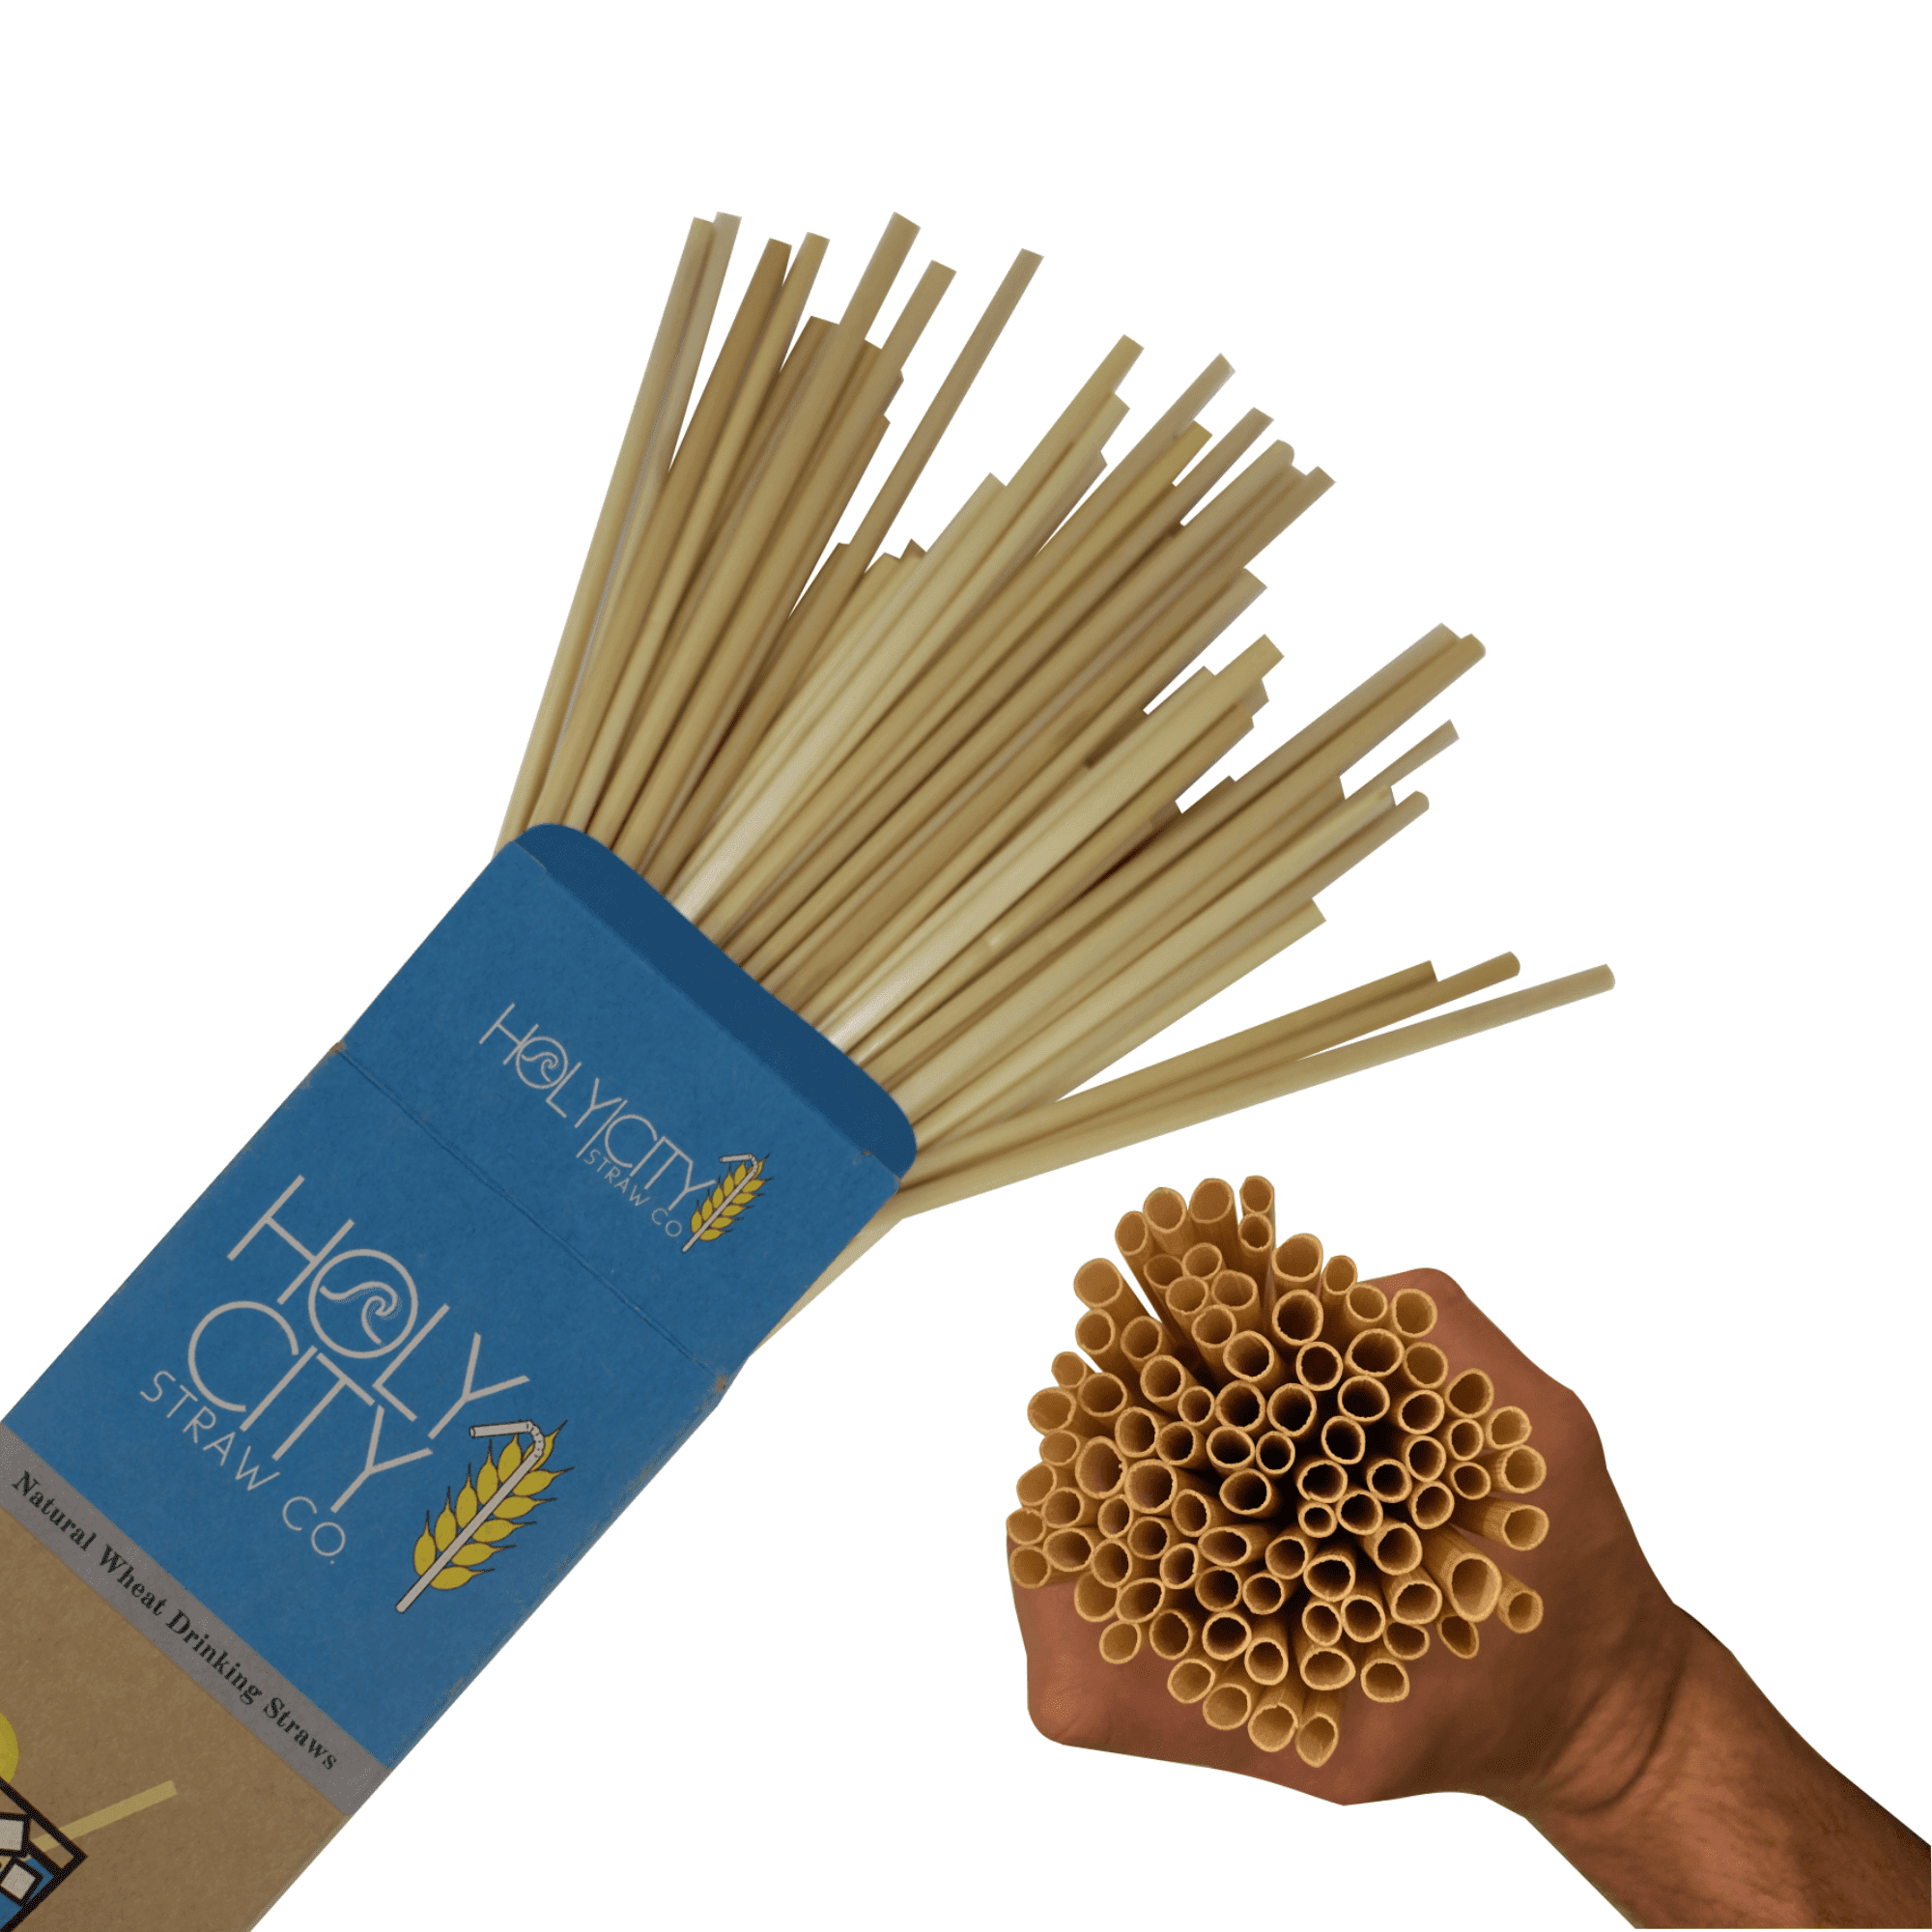 100 count box of Holy City Cocktail Straws with a fist full of straws